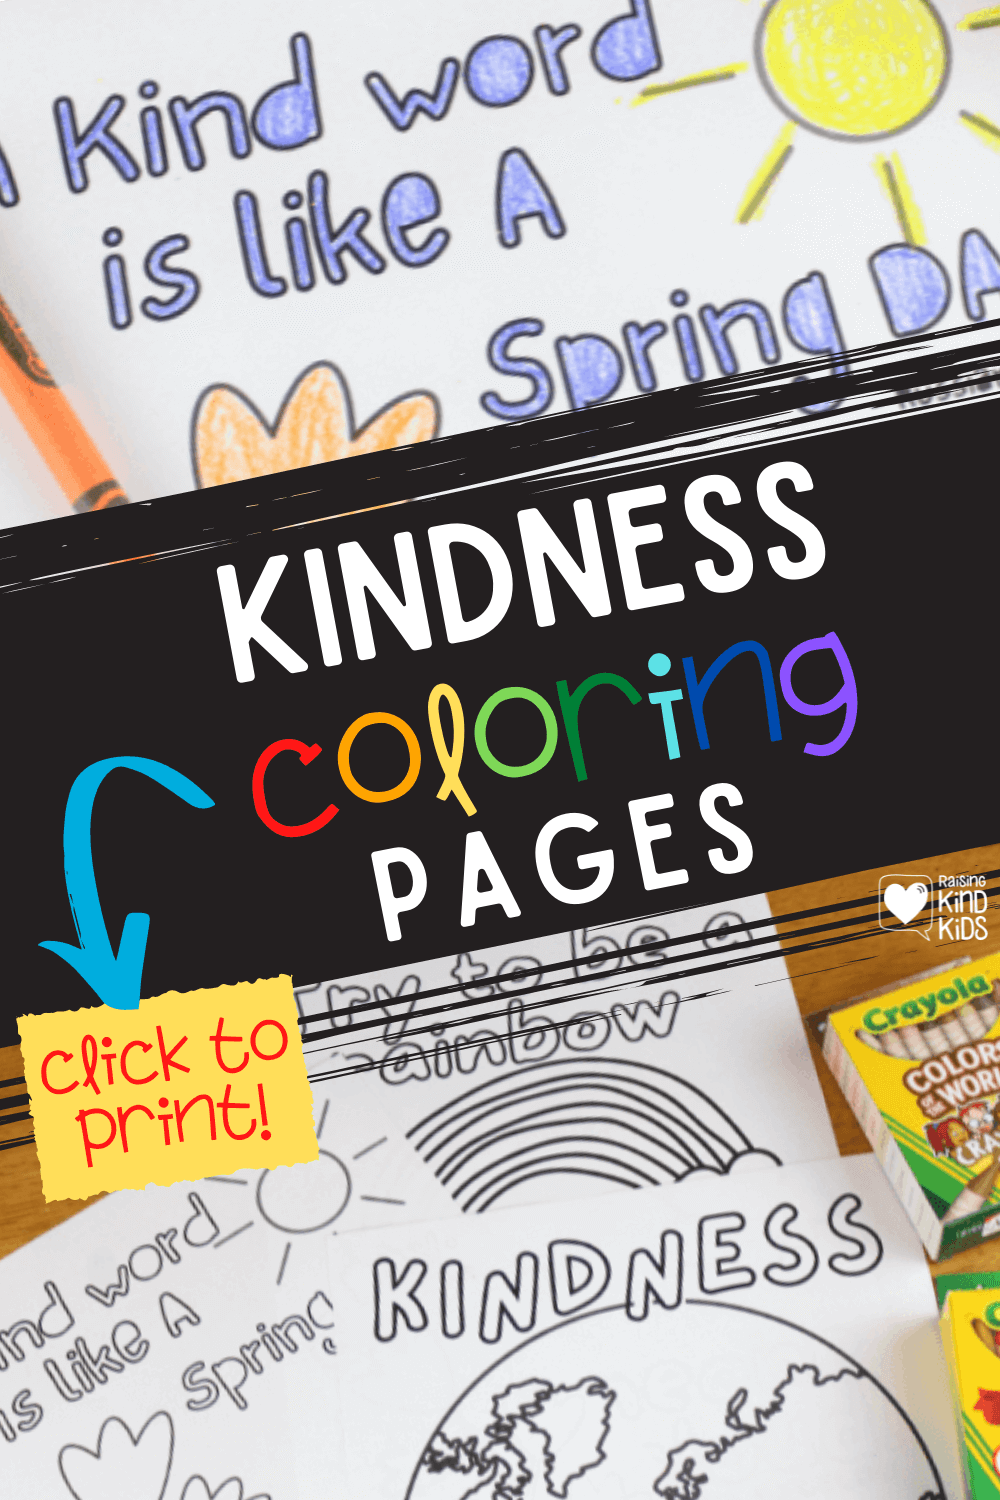 Use these kindness coloring pages to encourage more kindness with kids.